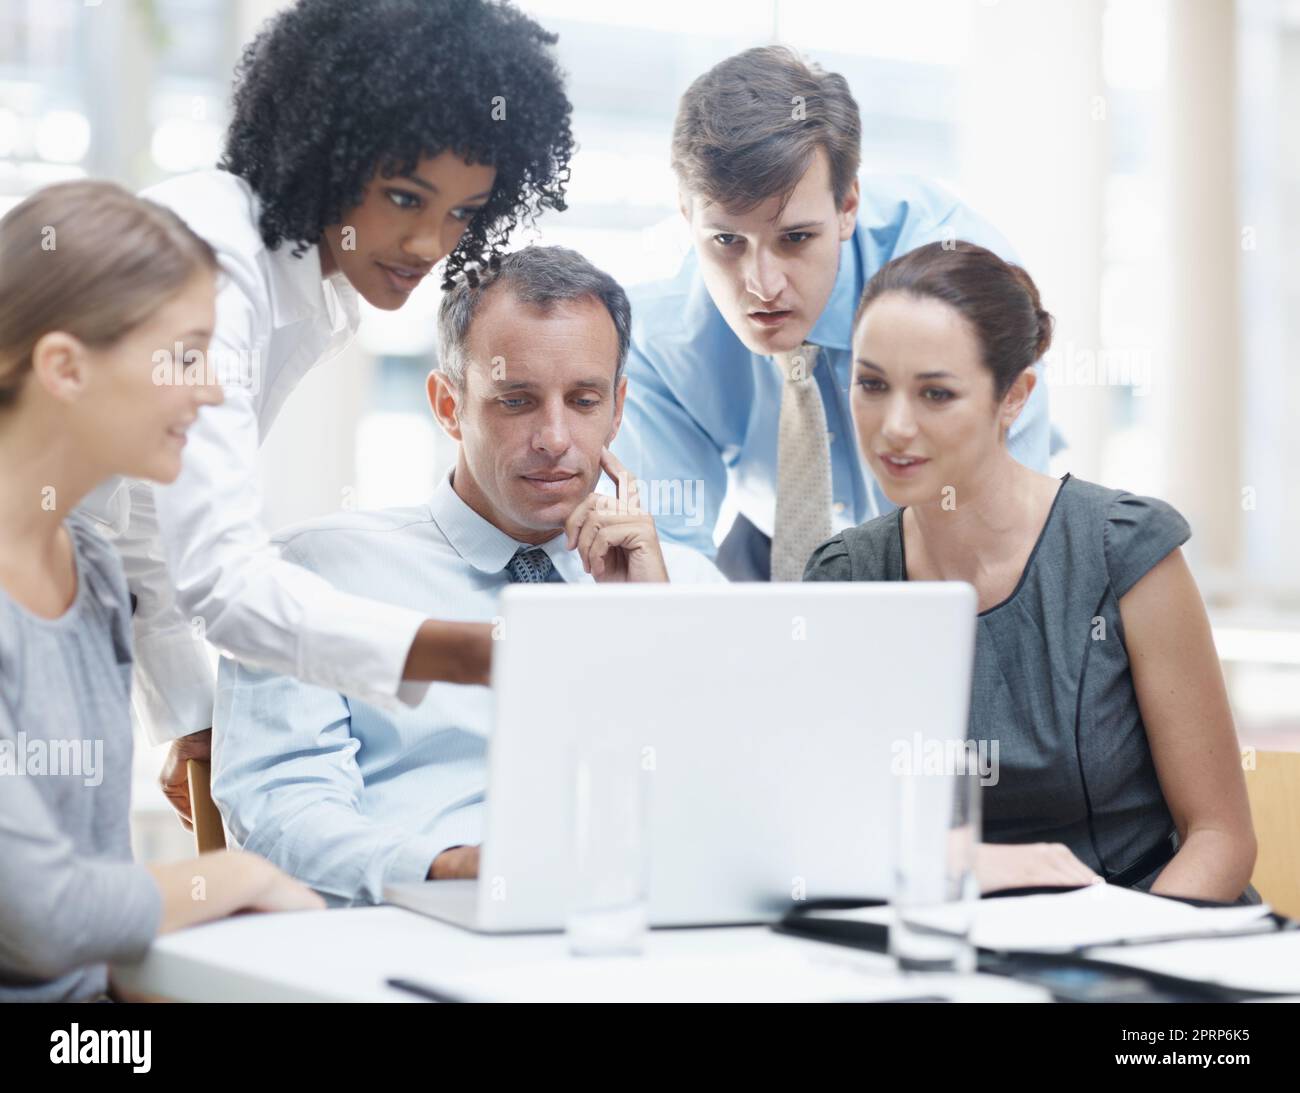 Designing the new website. A multi-ethnic group of business people sitting around a laptop during a meeting. Stock Photo